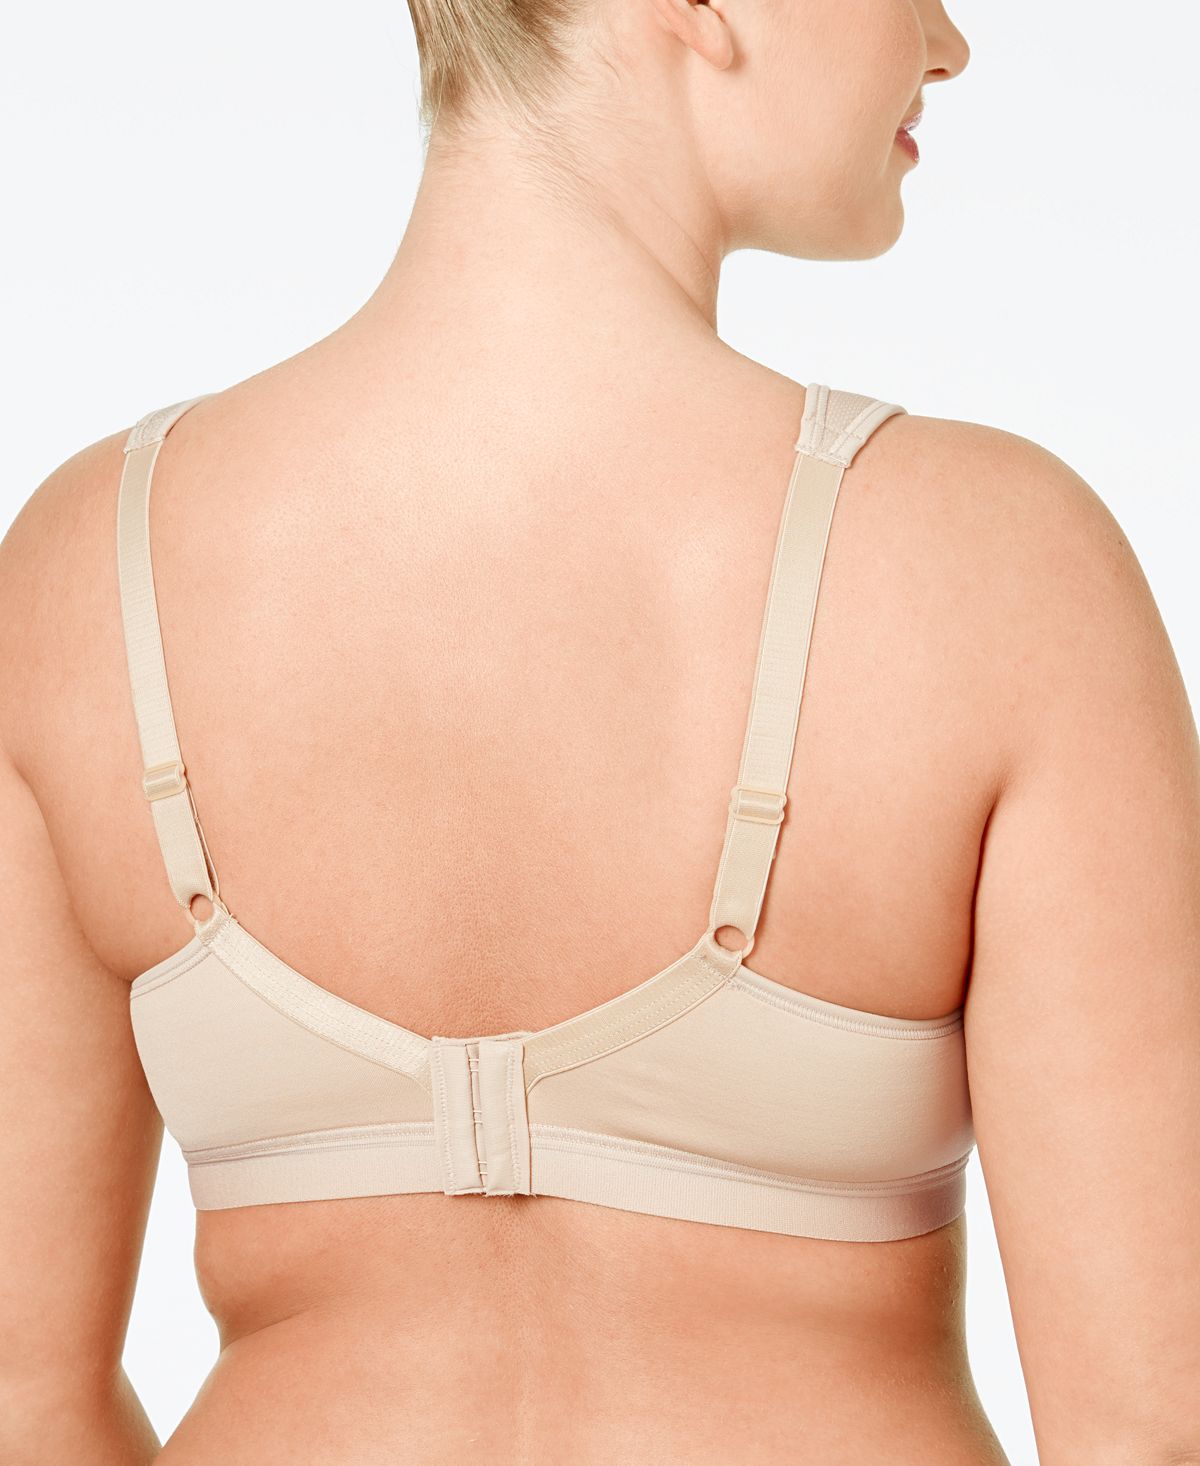 Playtex 18 Hour Active Lifestyle Low Impact Wireless Bra 4159 Online Only Nude (Nude 4)